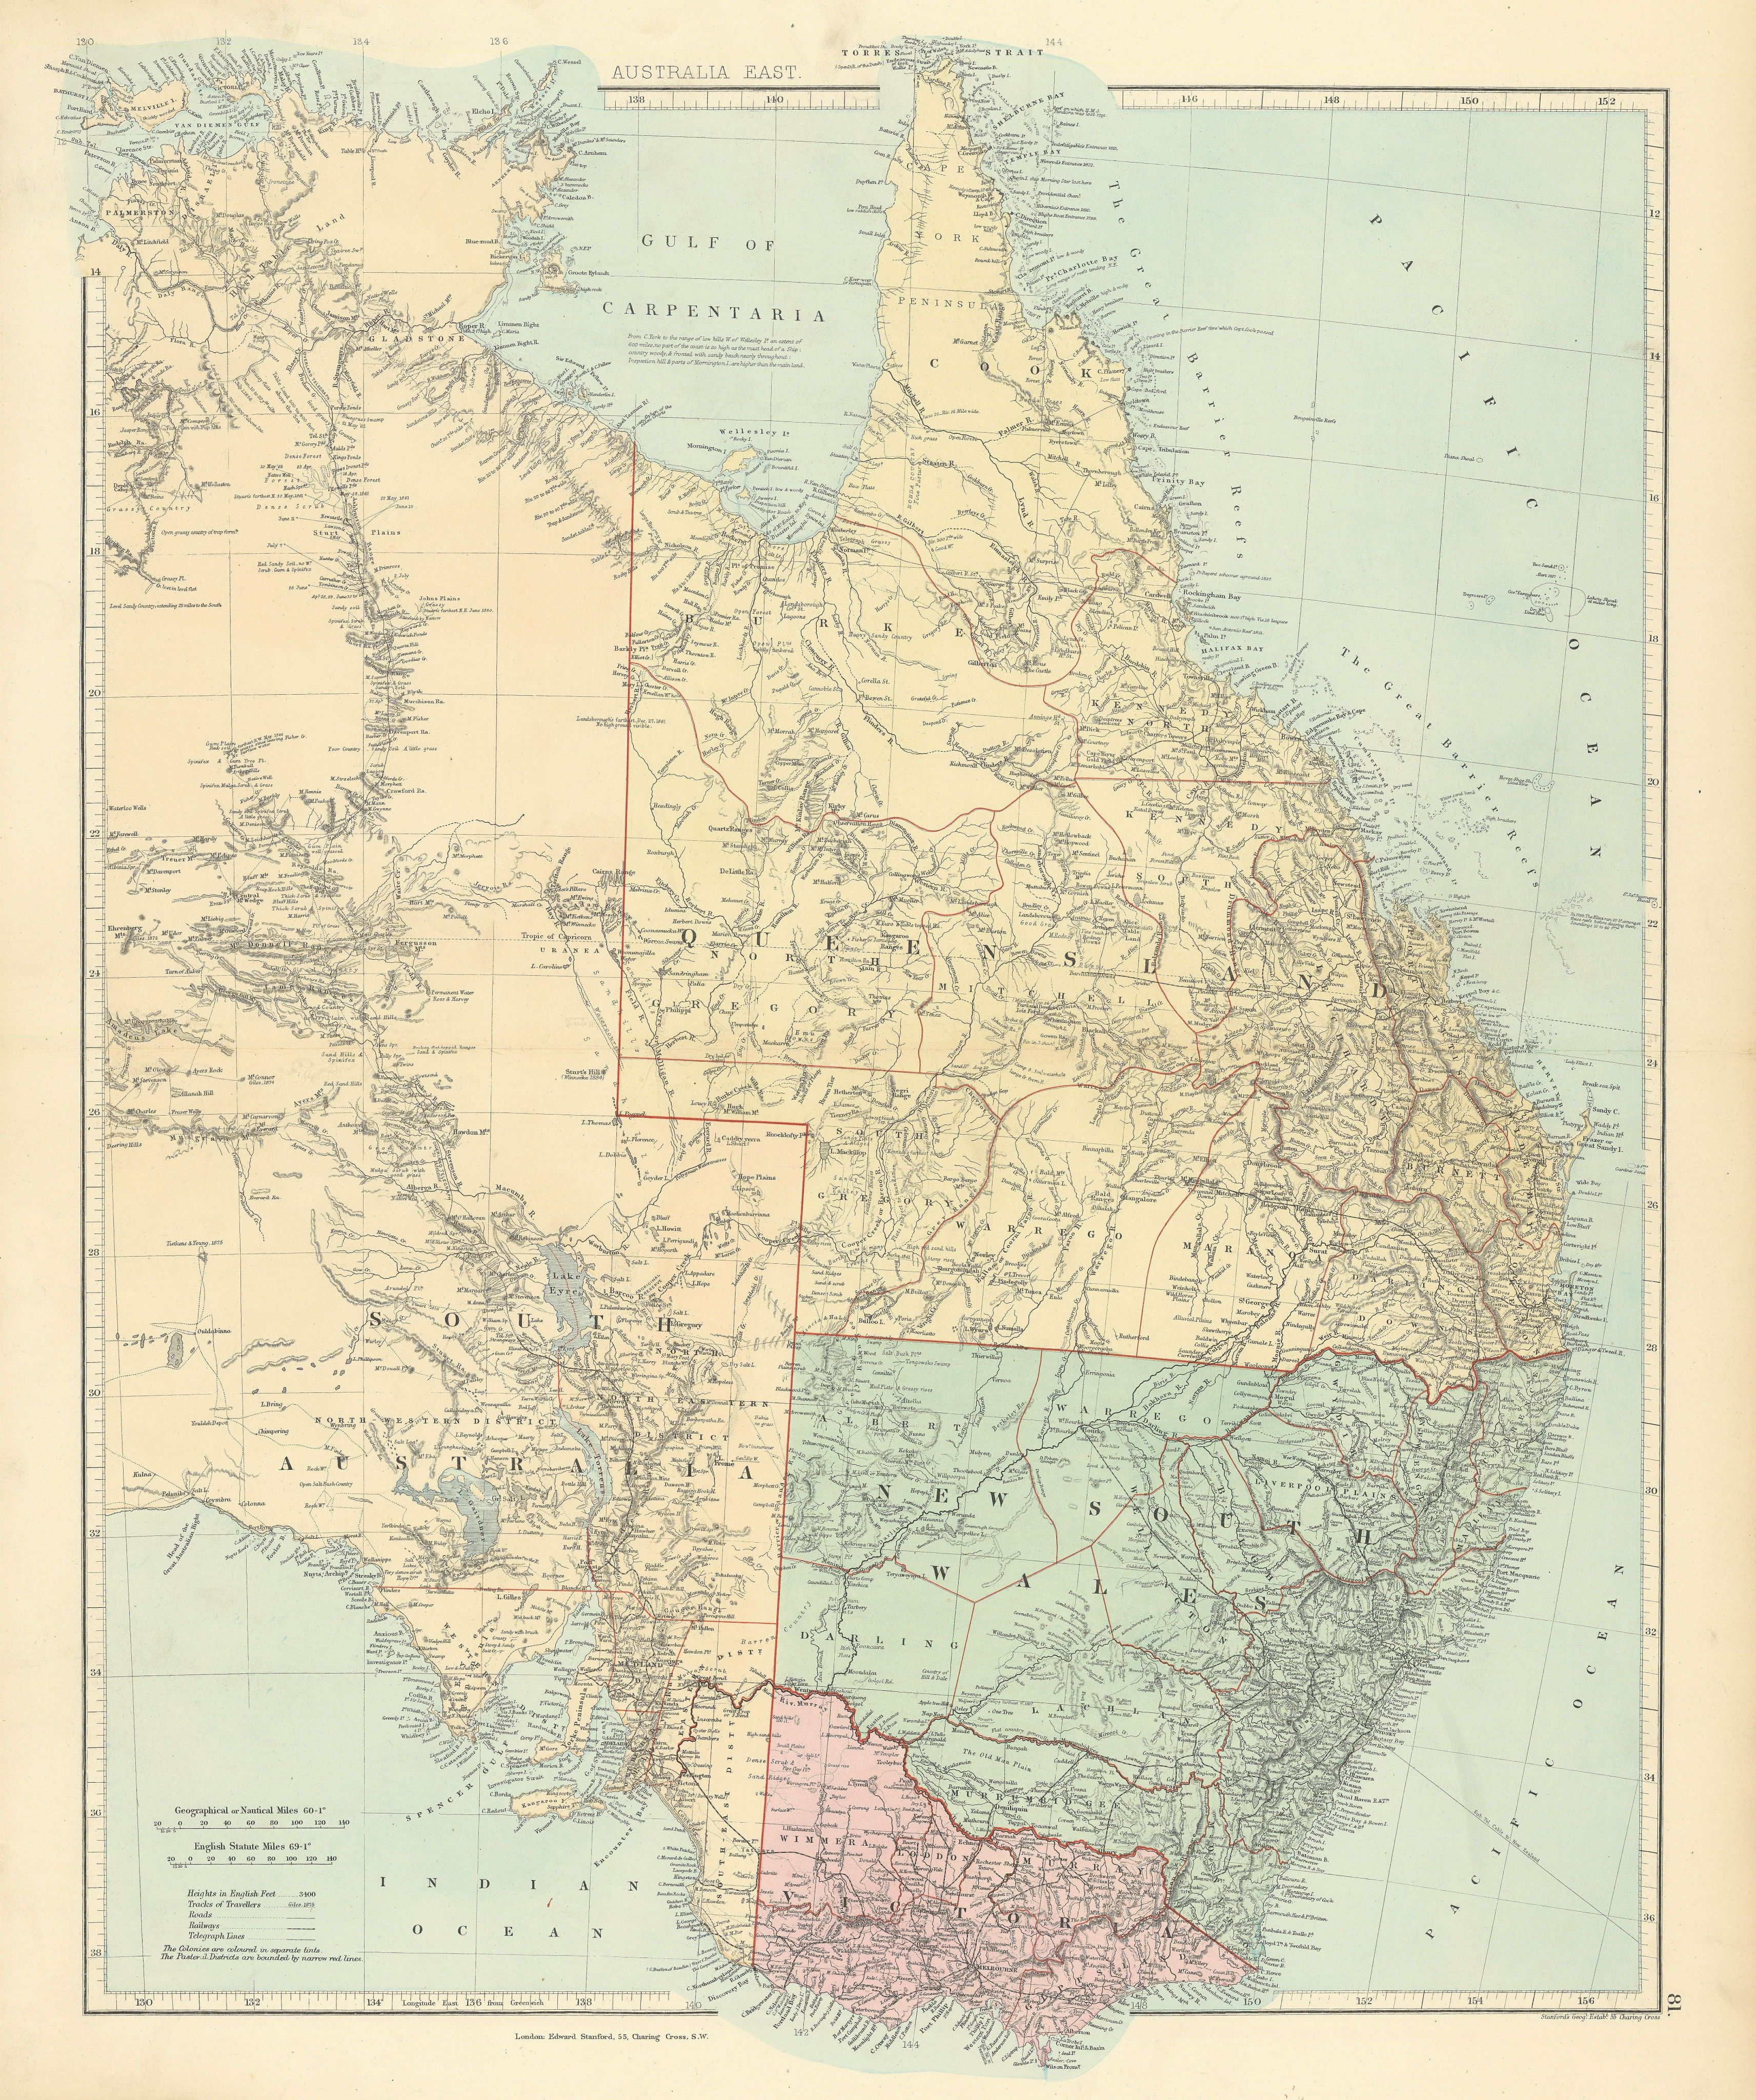 Associate Product Eastern Australia. New South Wales Victoria Queensland. STANFORD 1887 old map